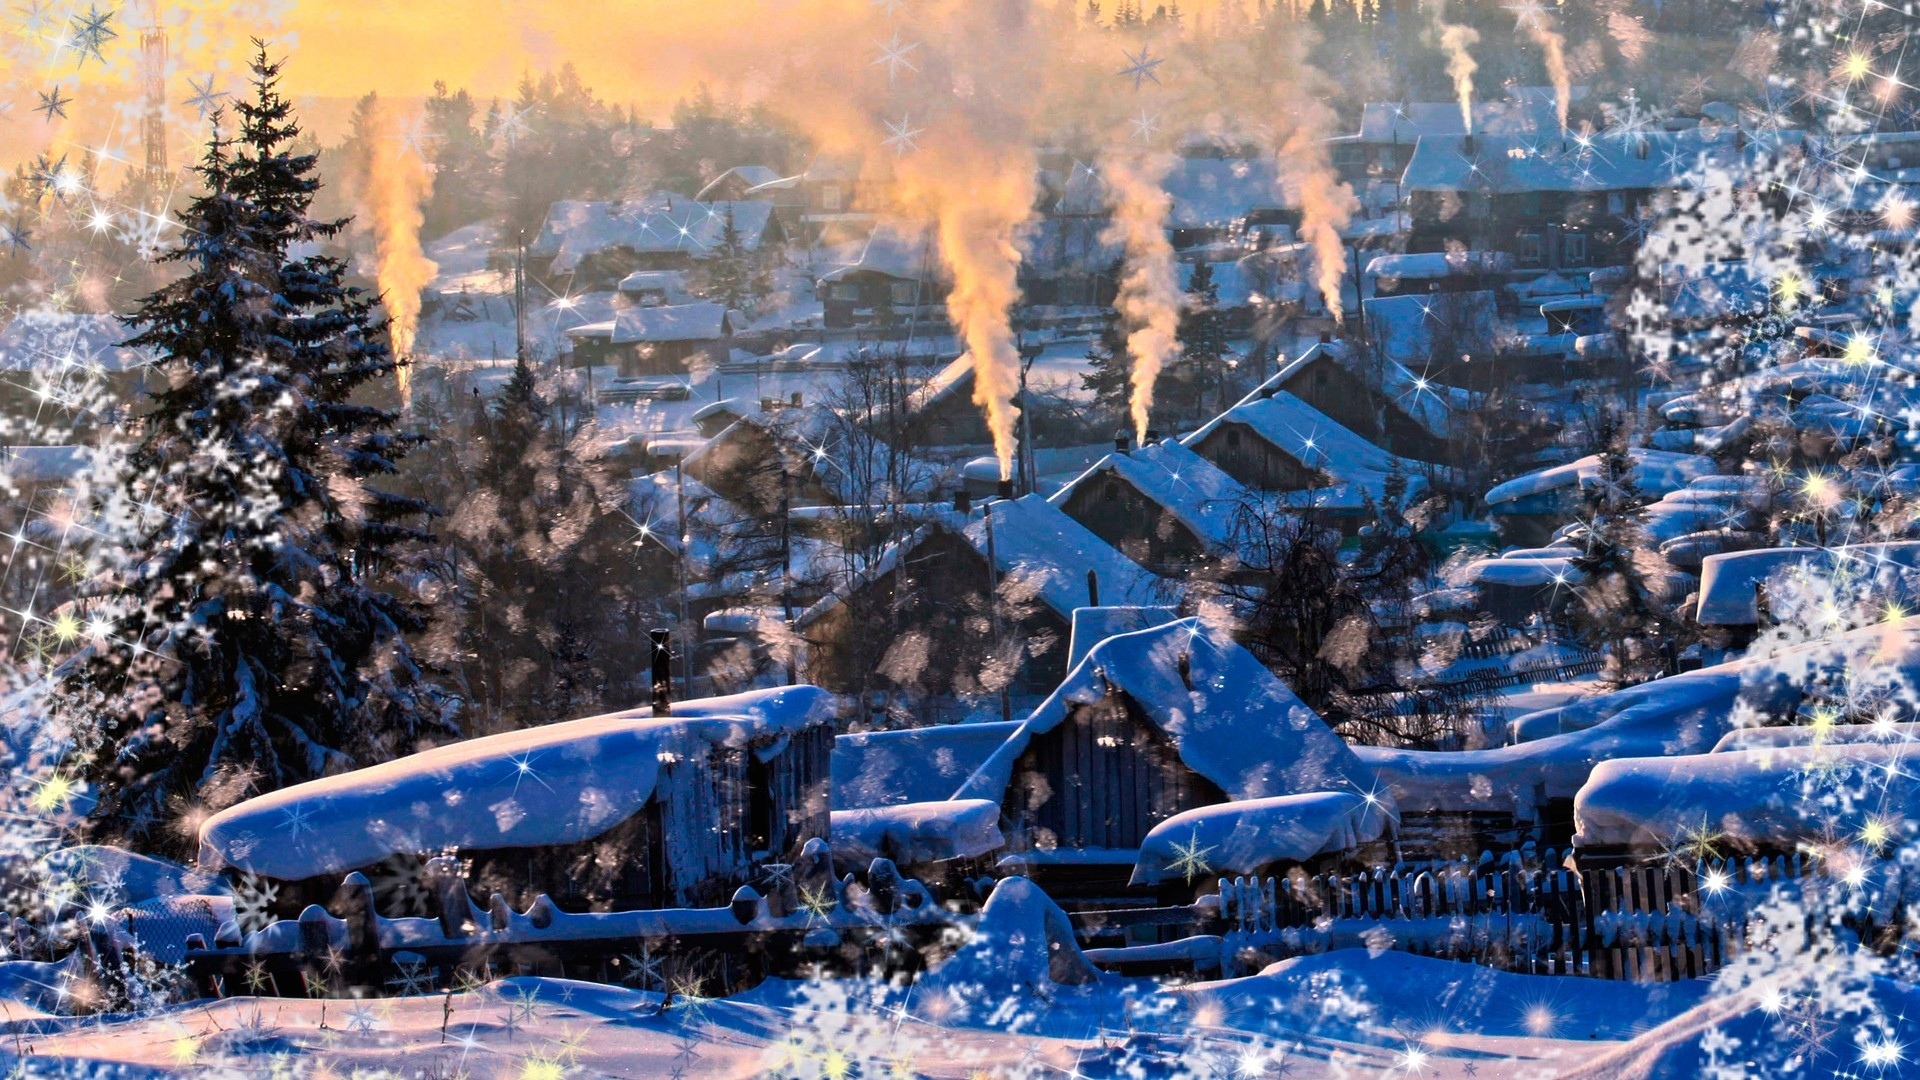 nature, Landscapes, Winter, Snow, Snowing, Flakes, Drops, Art, Artistic, Manipulation, Seasons, Trees, Architecture, Buildings, House, Smoke, Sunset, Sunrise, Cozy, Christmas Wallpaper